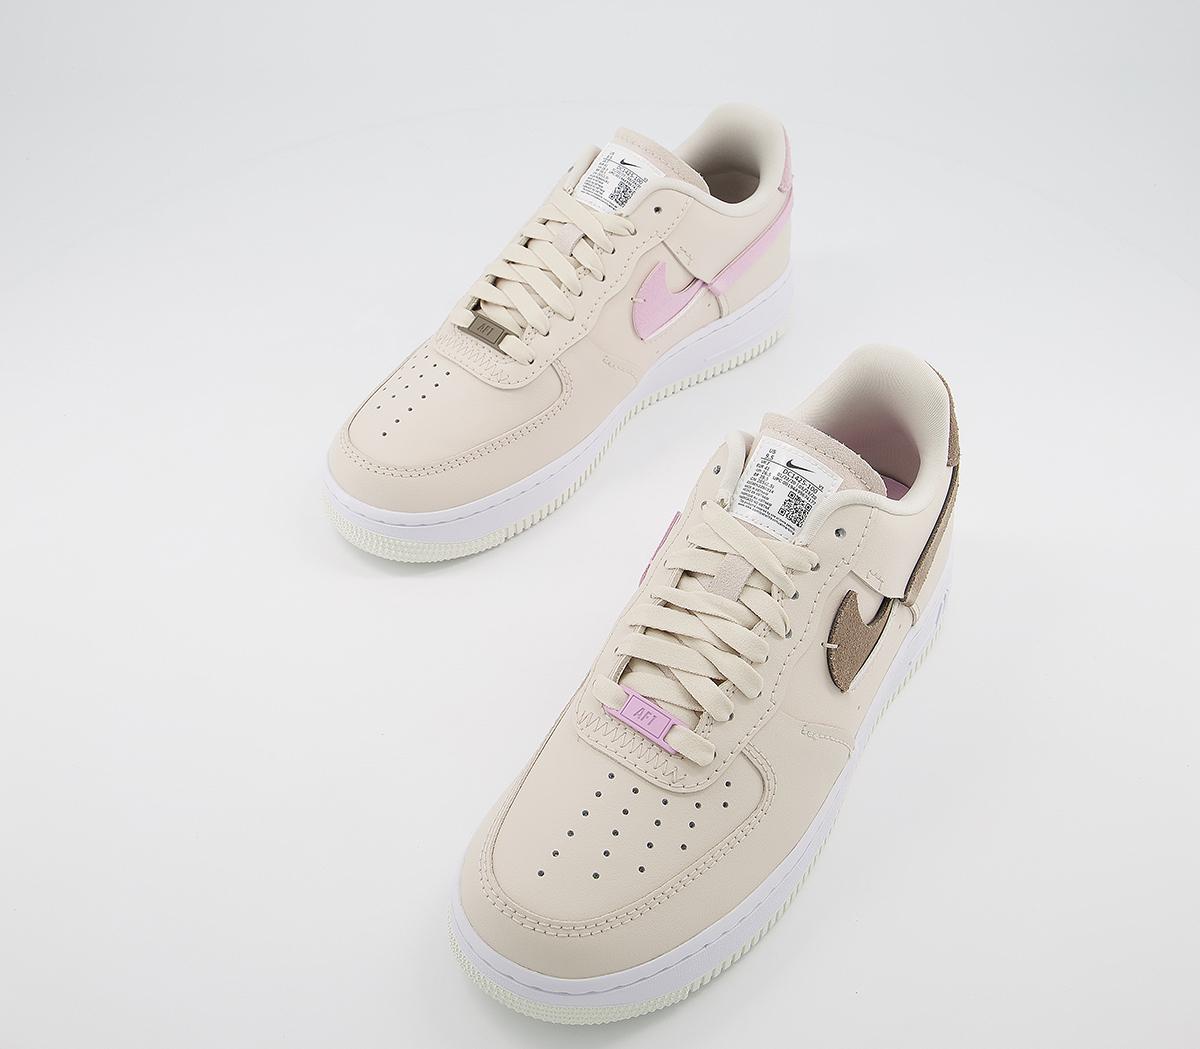 Nike Air Force 1 07 Trainers Light Orewood Artic Pink - Women's Trainers